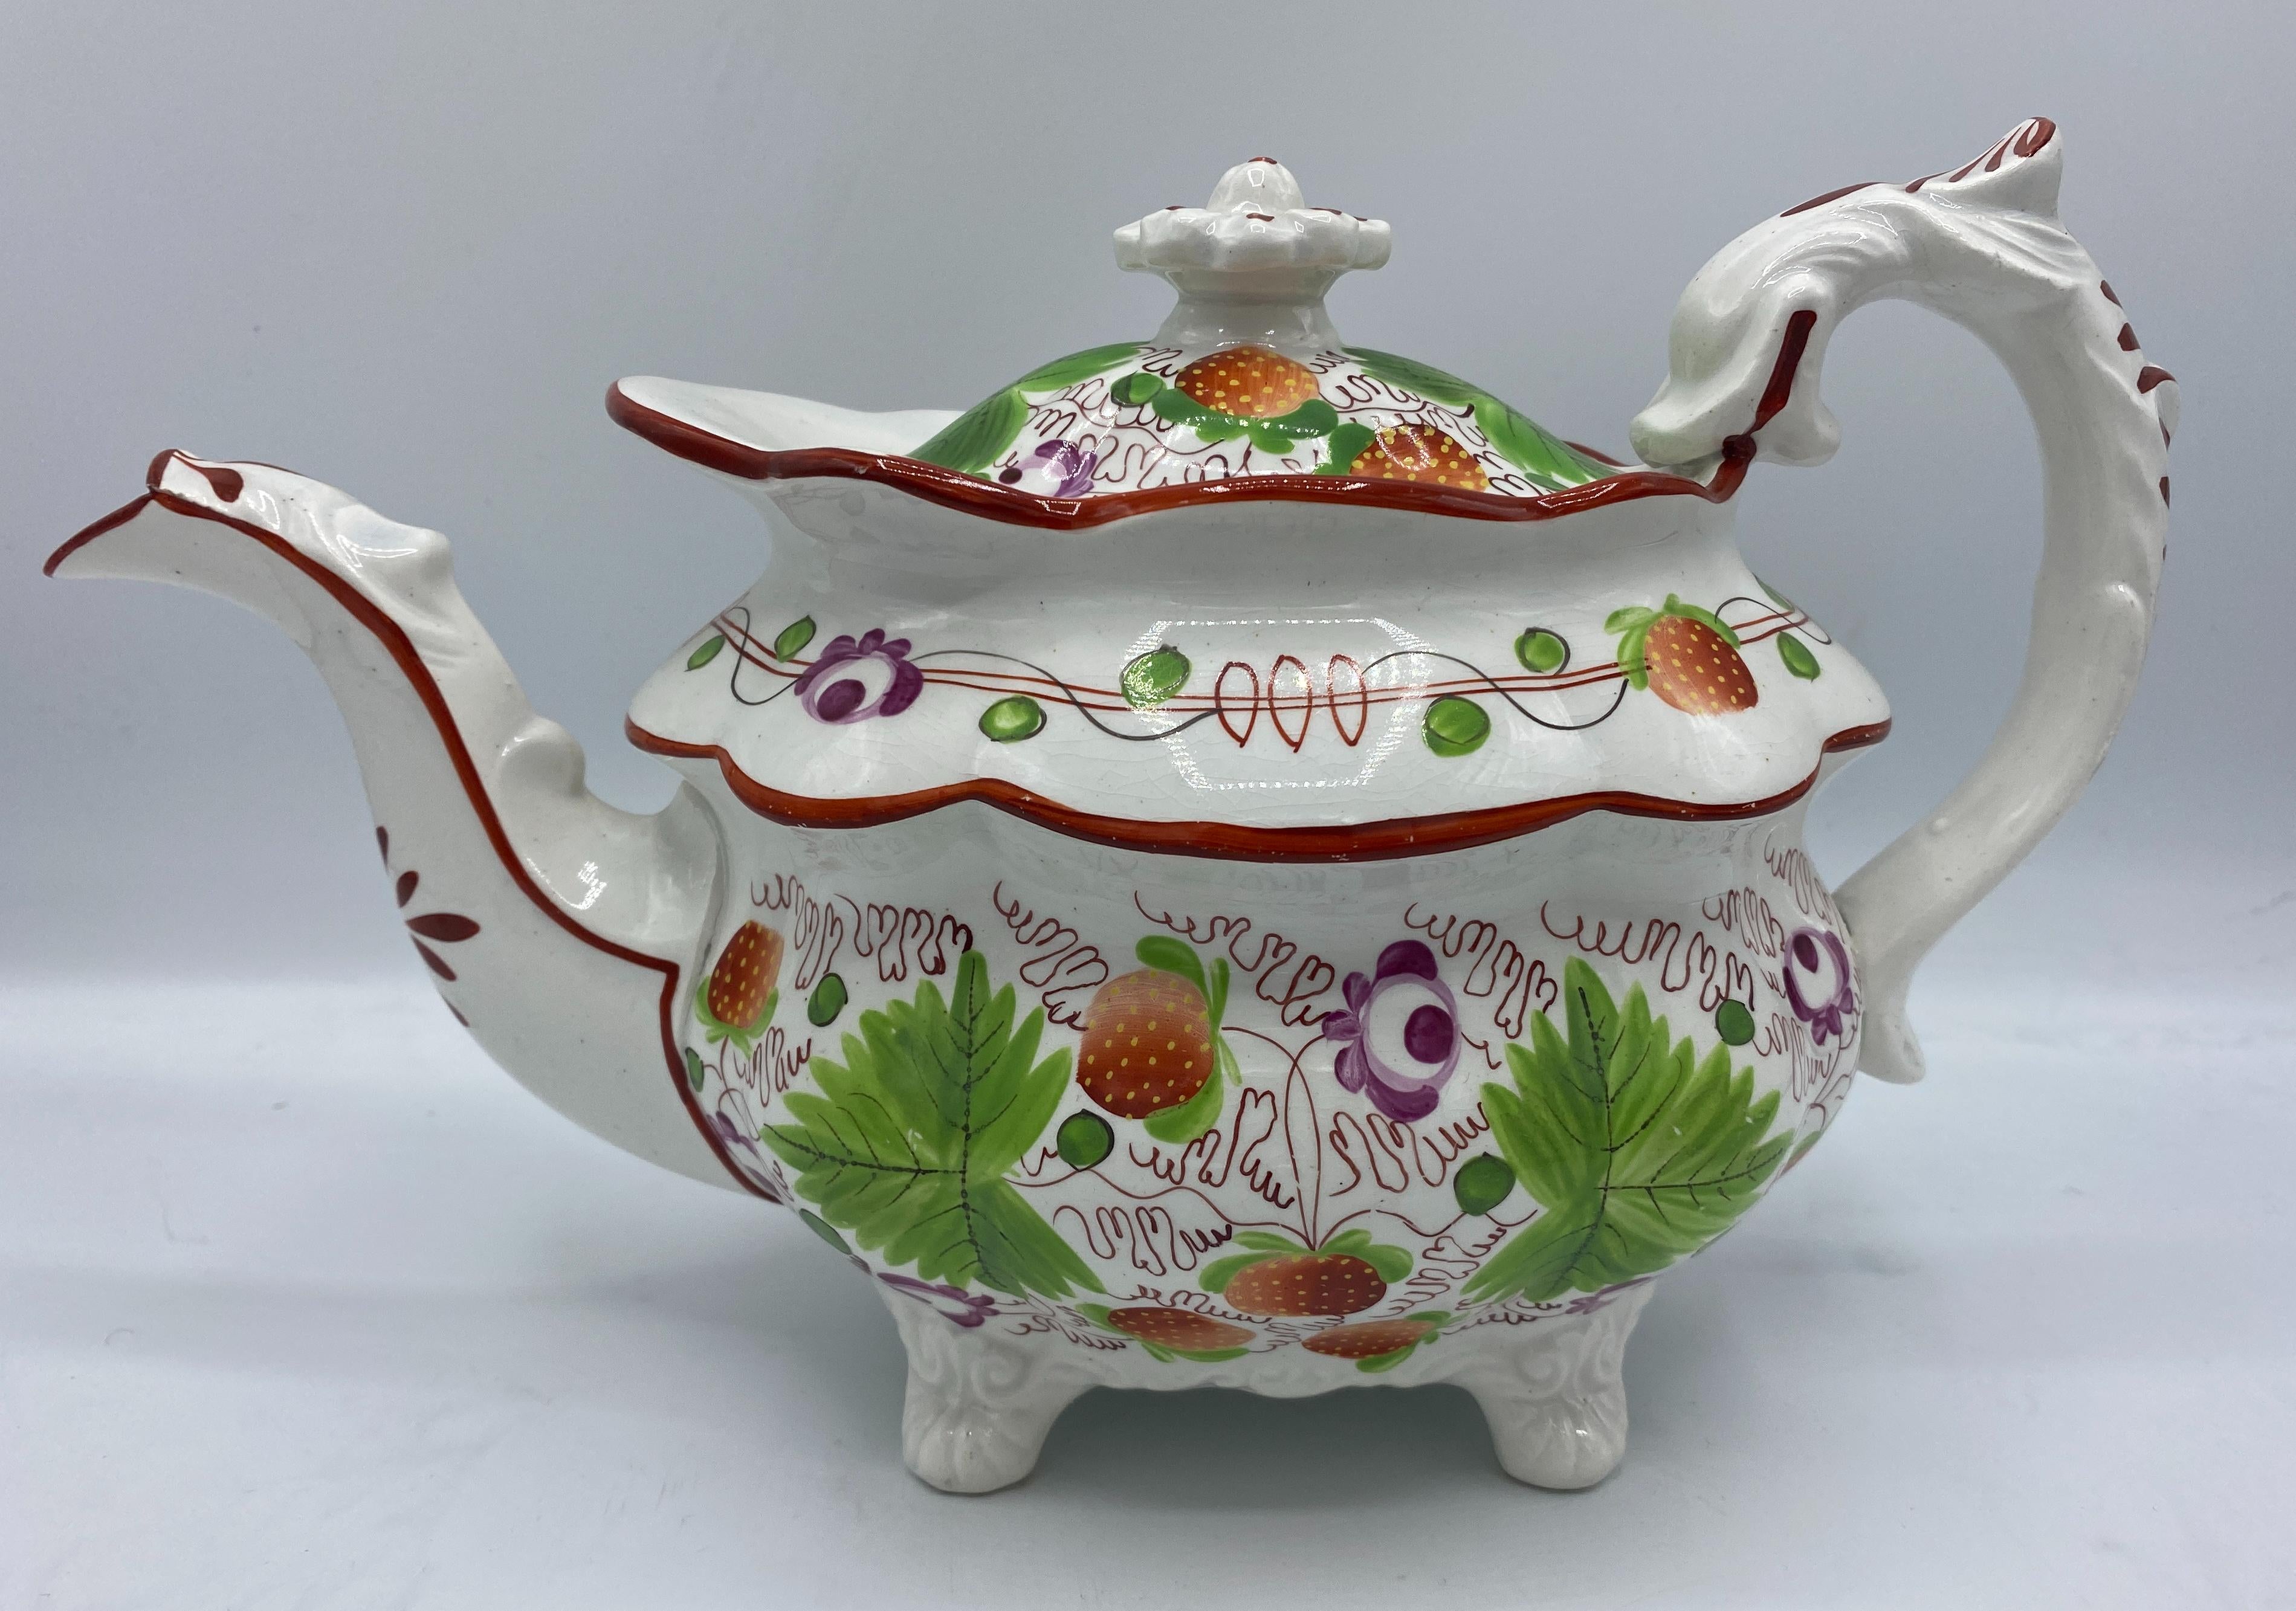 19th century Staffordshire Pealware tea set with strawberry pattern with vines and green leaves. England, 1830 circa
Measurements: 
Teapot - 7.5